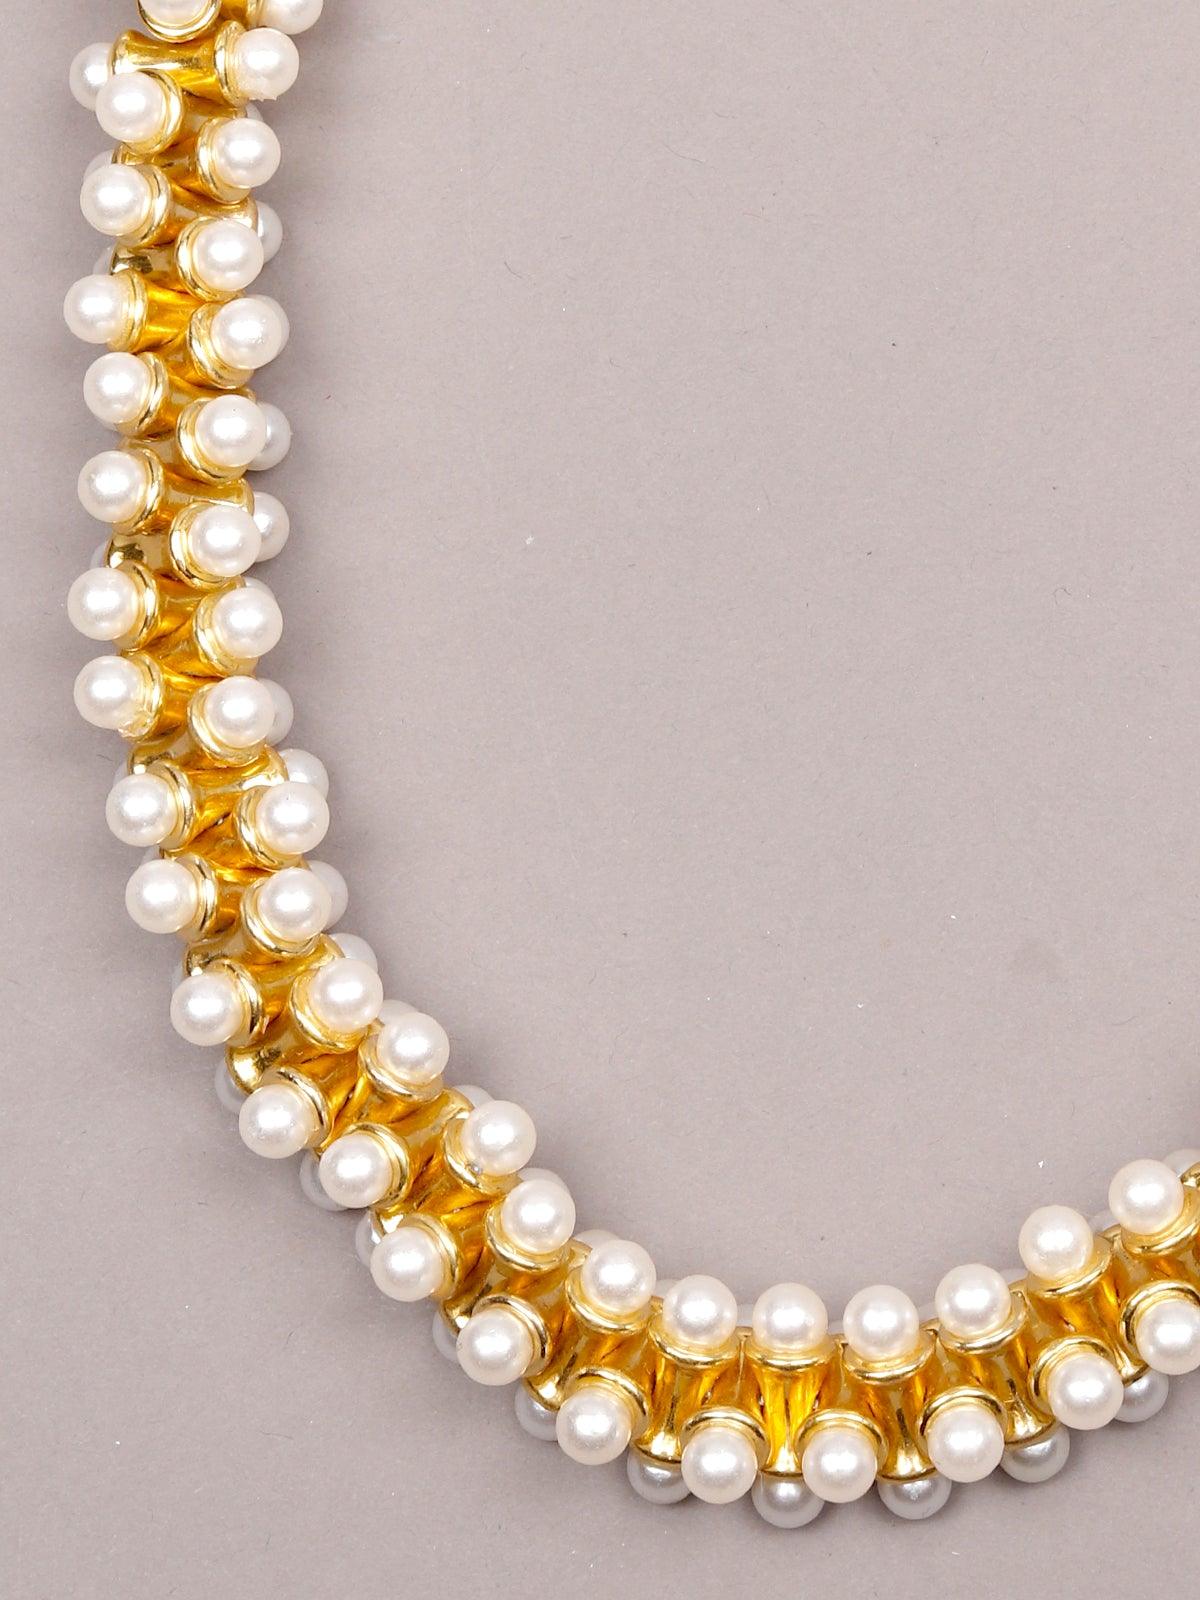 Women's Exquisite Gold-Tone Pearl Embellished Necklace - Odette